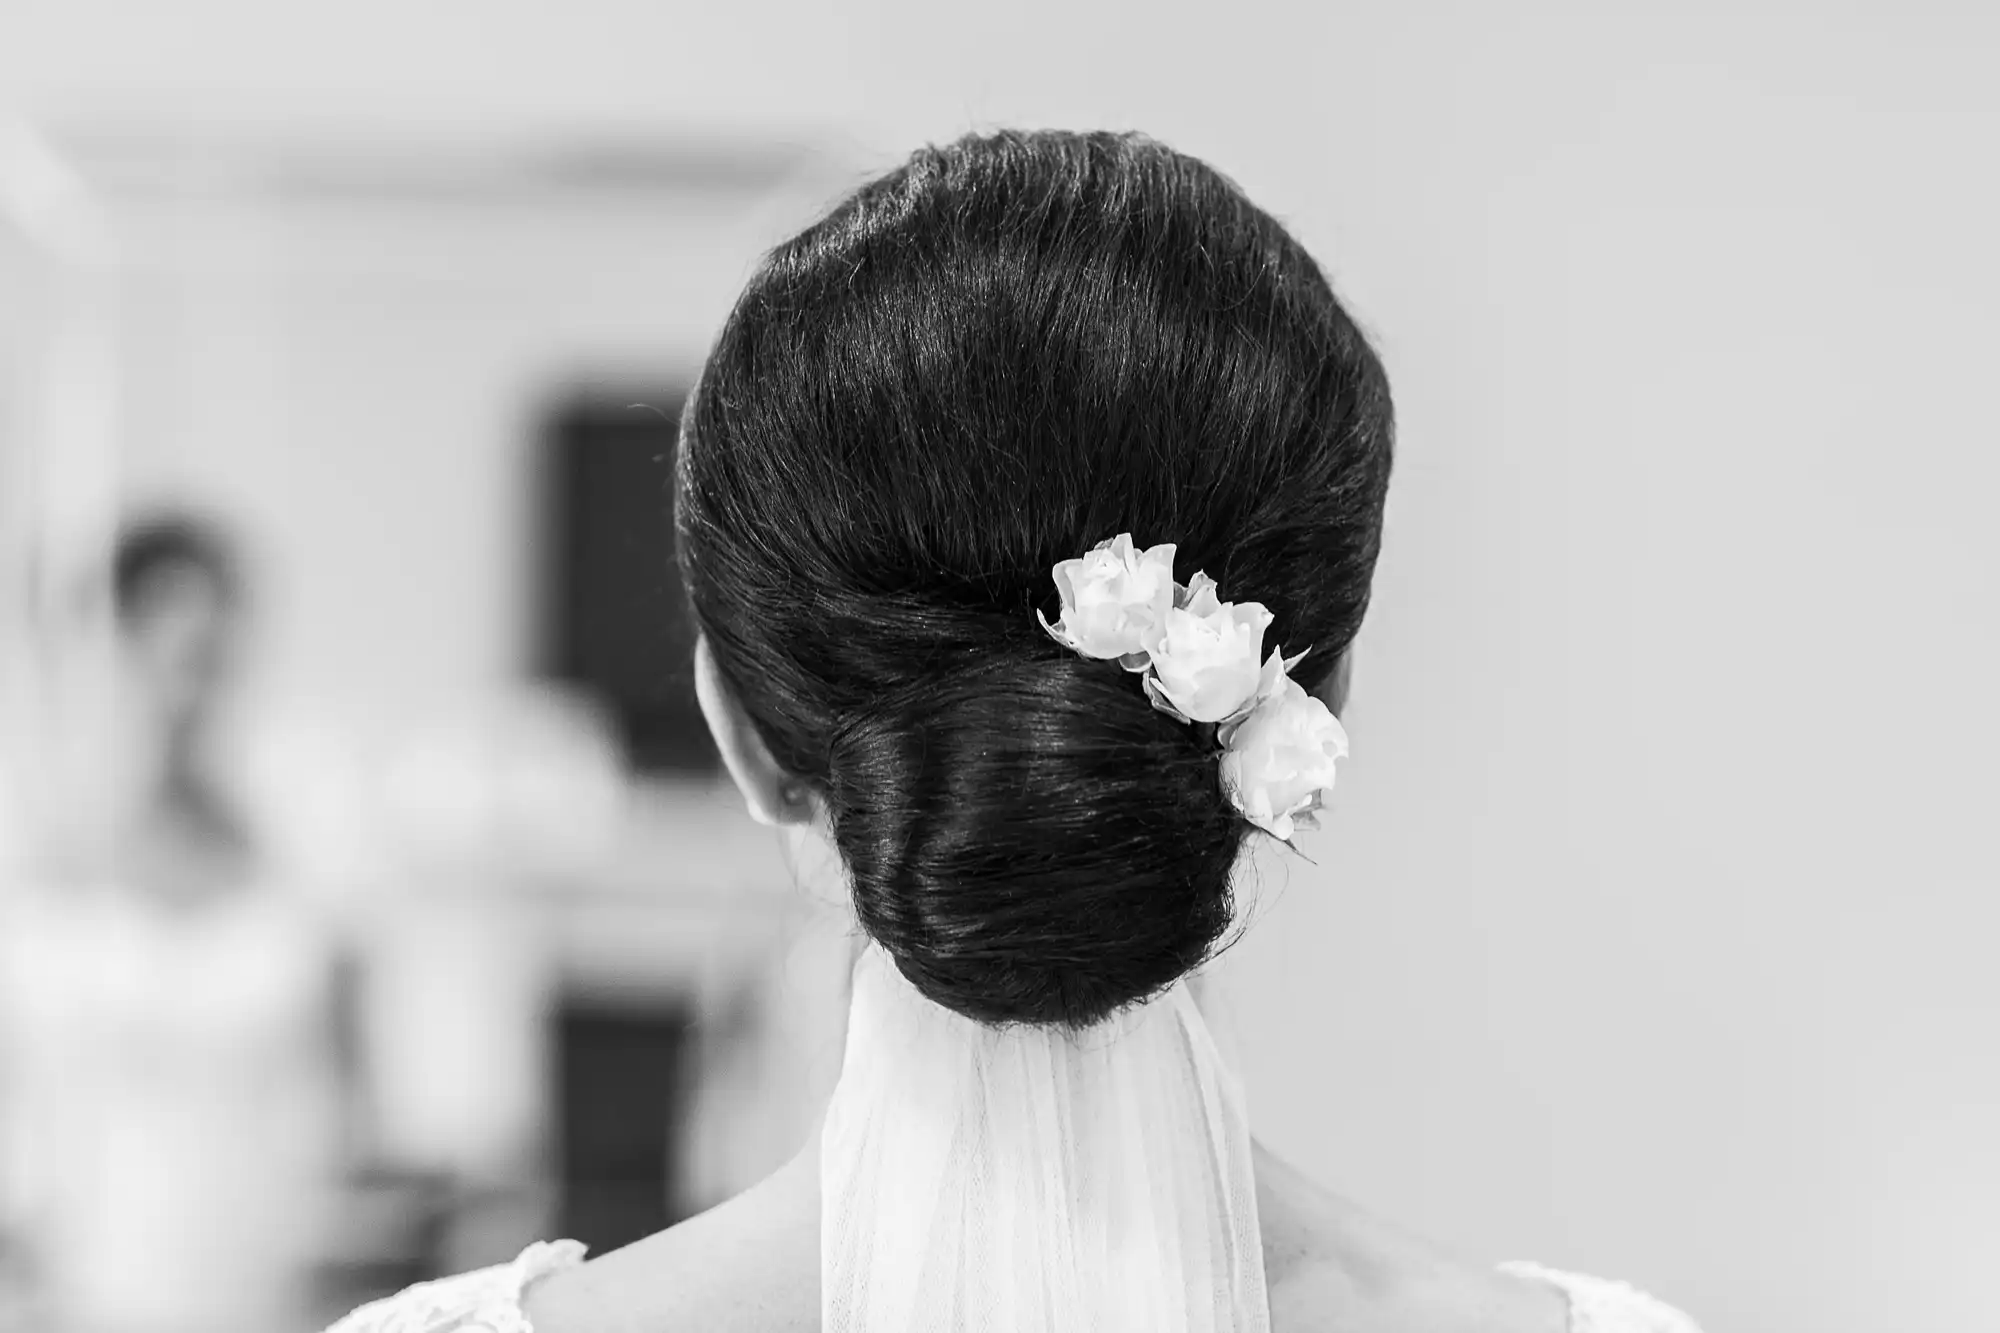 Black and white photo of a woman from behind showing an elegant updo hairstyle with small white flowers.